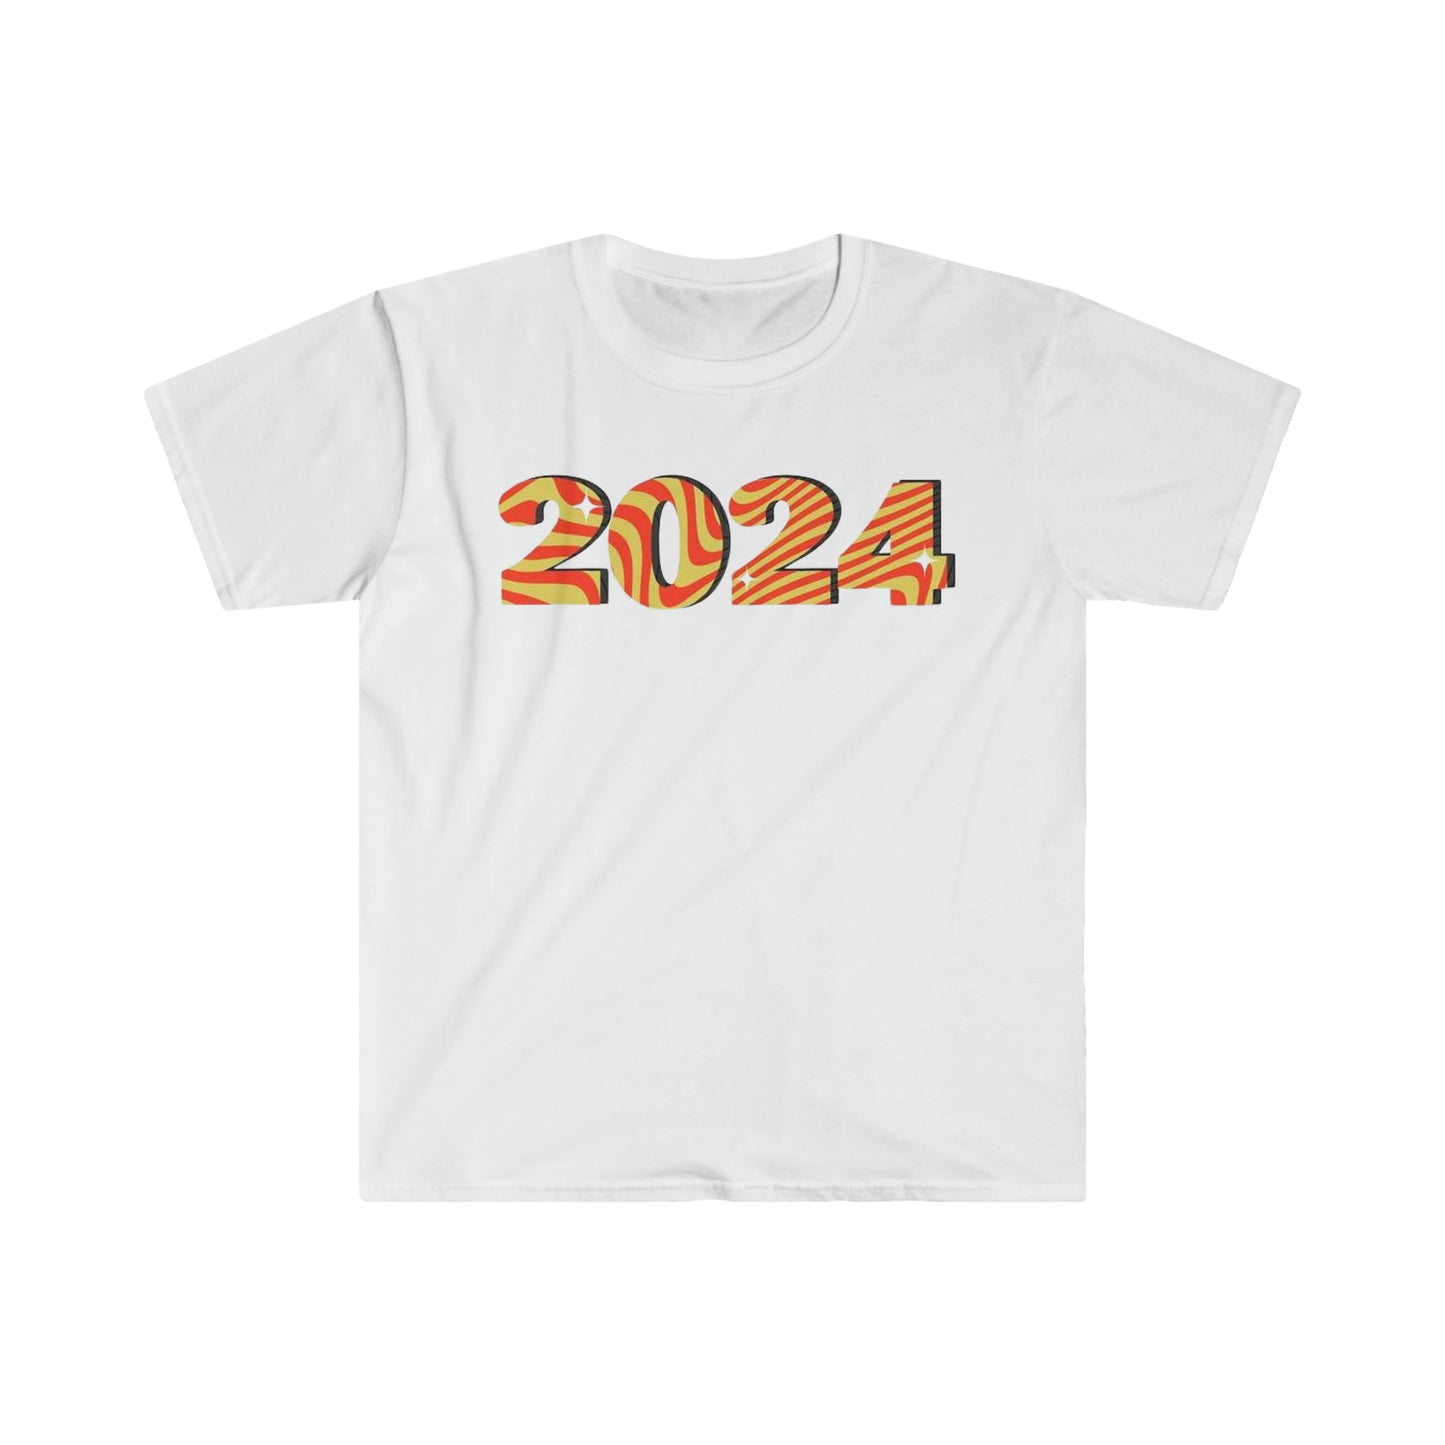 Class of 2024 Period - Unisex Softstyle T-Shirt